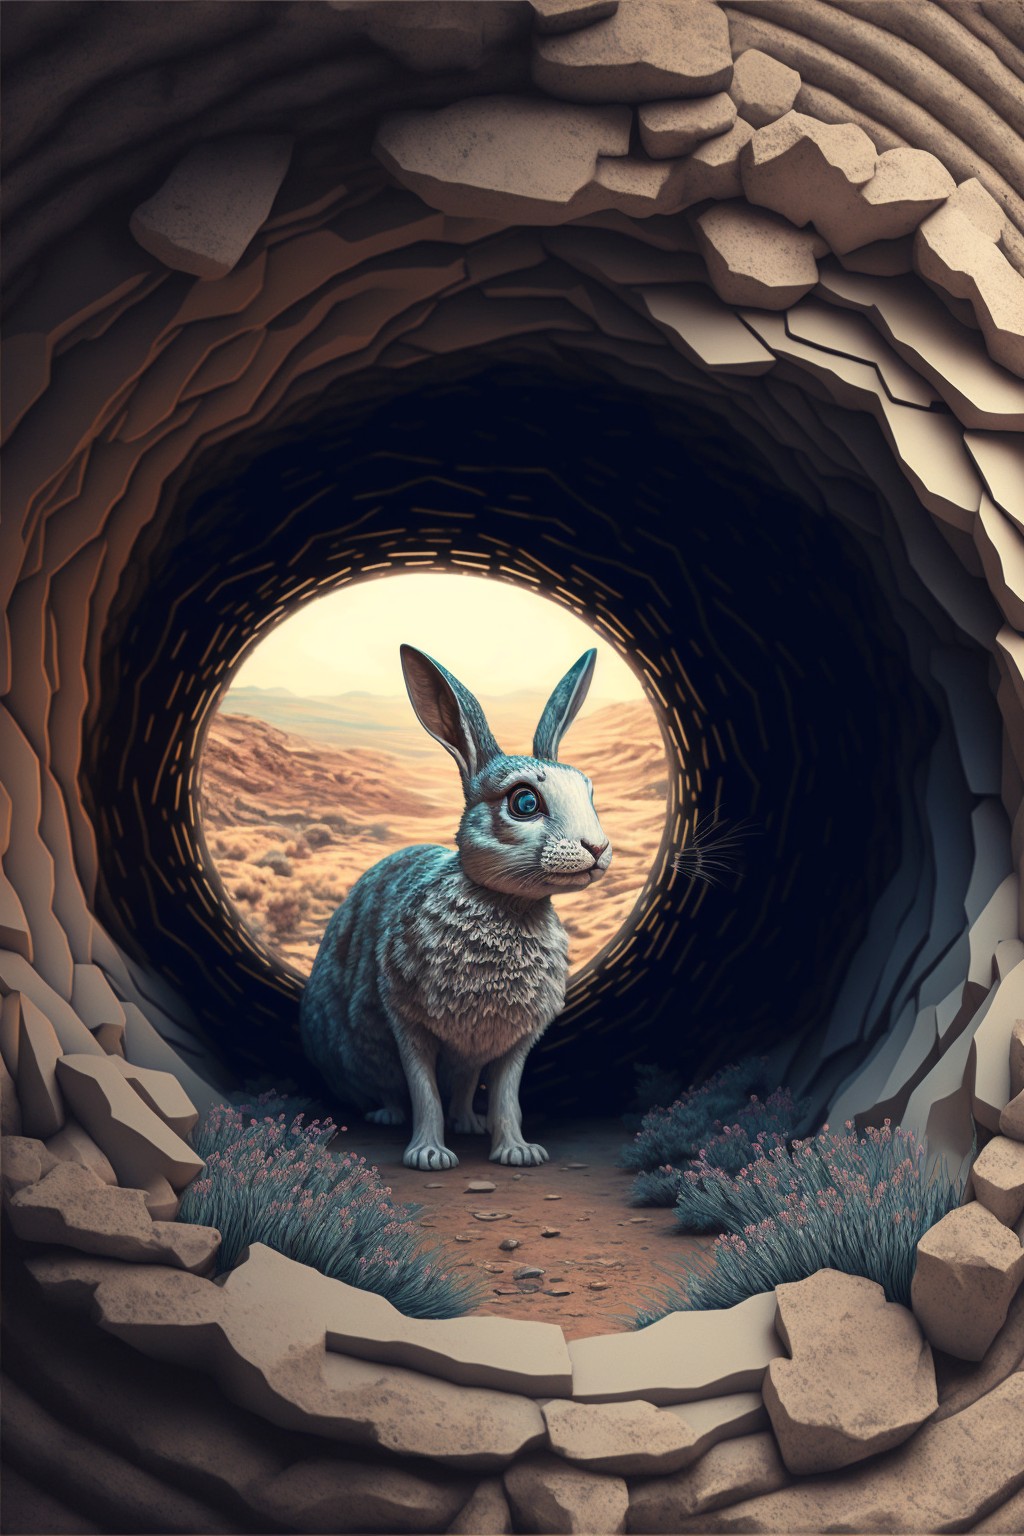 The rabbit who finally found the exit in the psychedelic cave